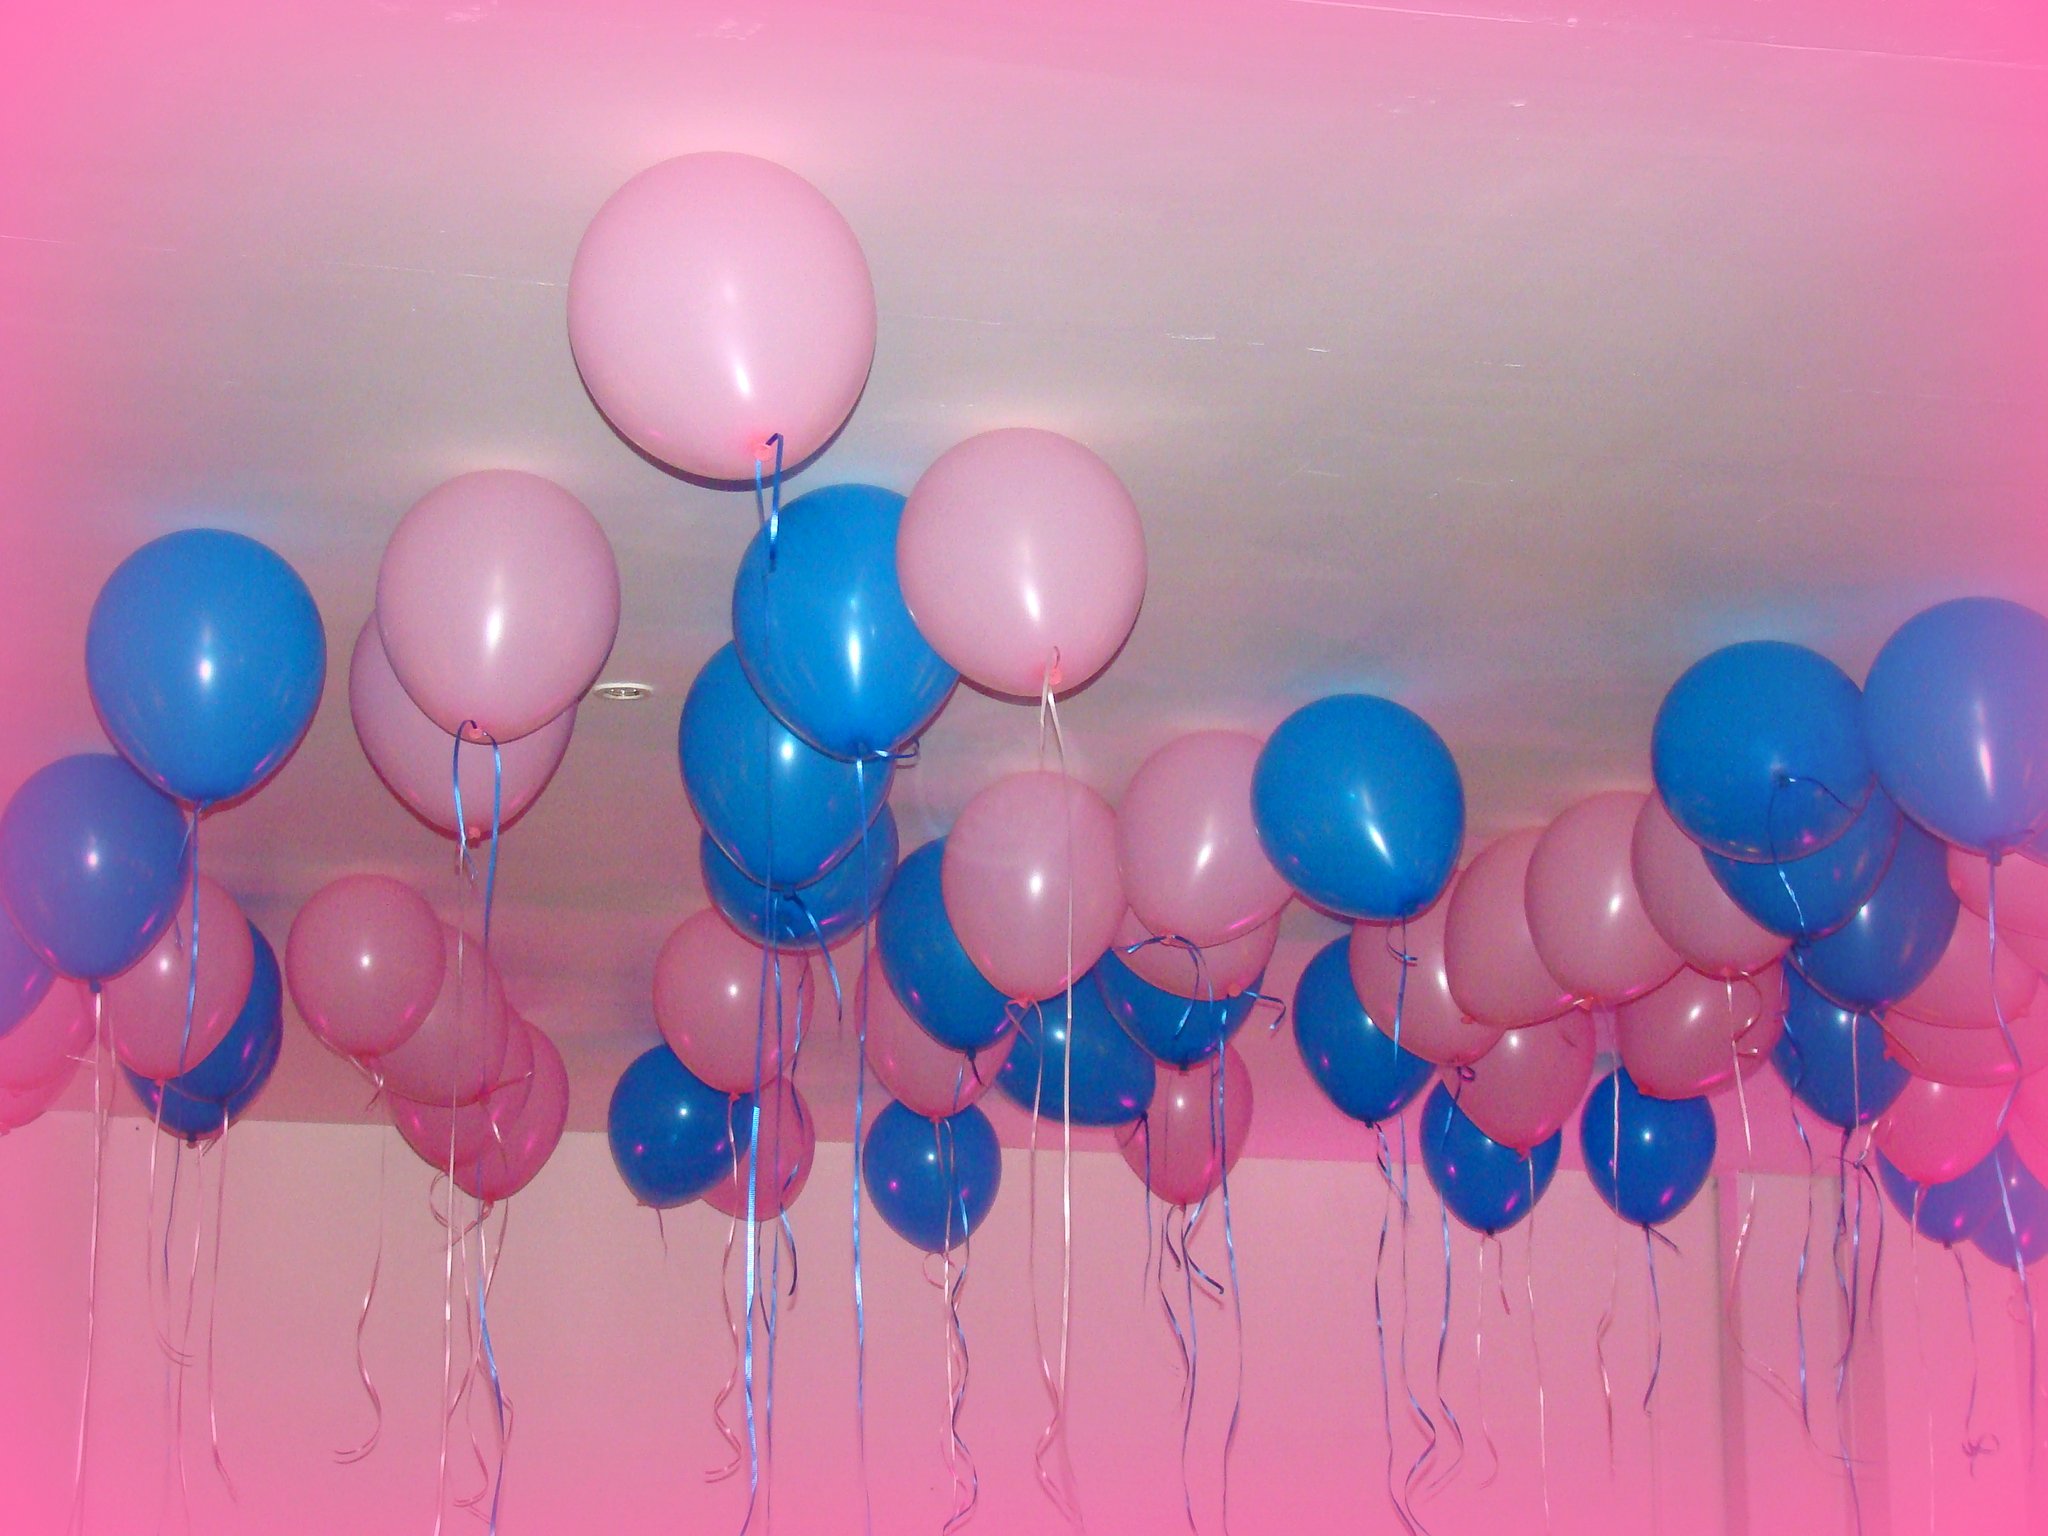 many balloons in rows hanging from the ceiling